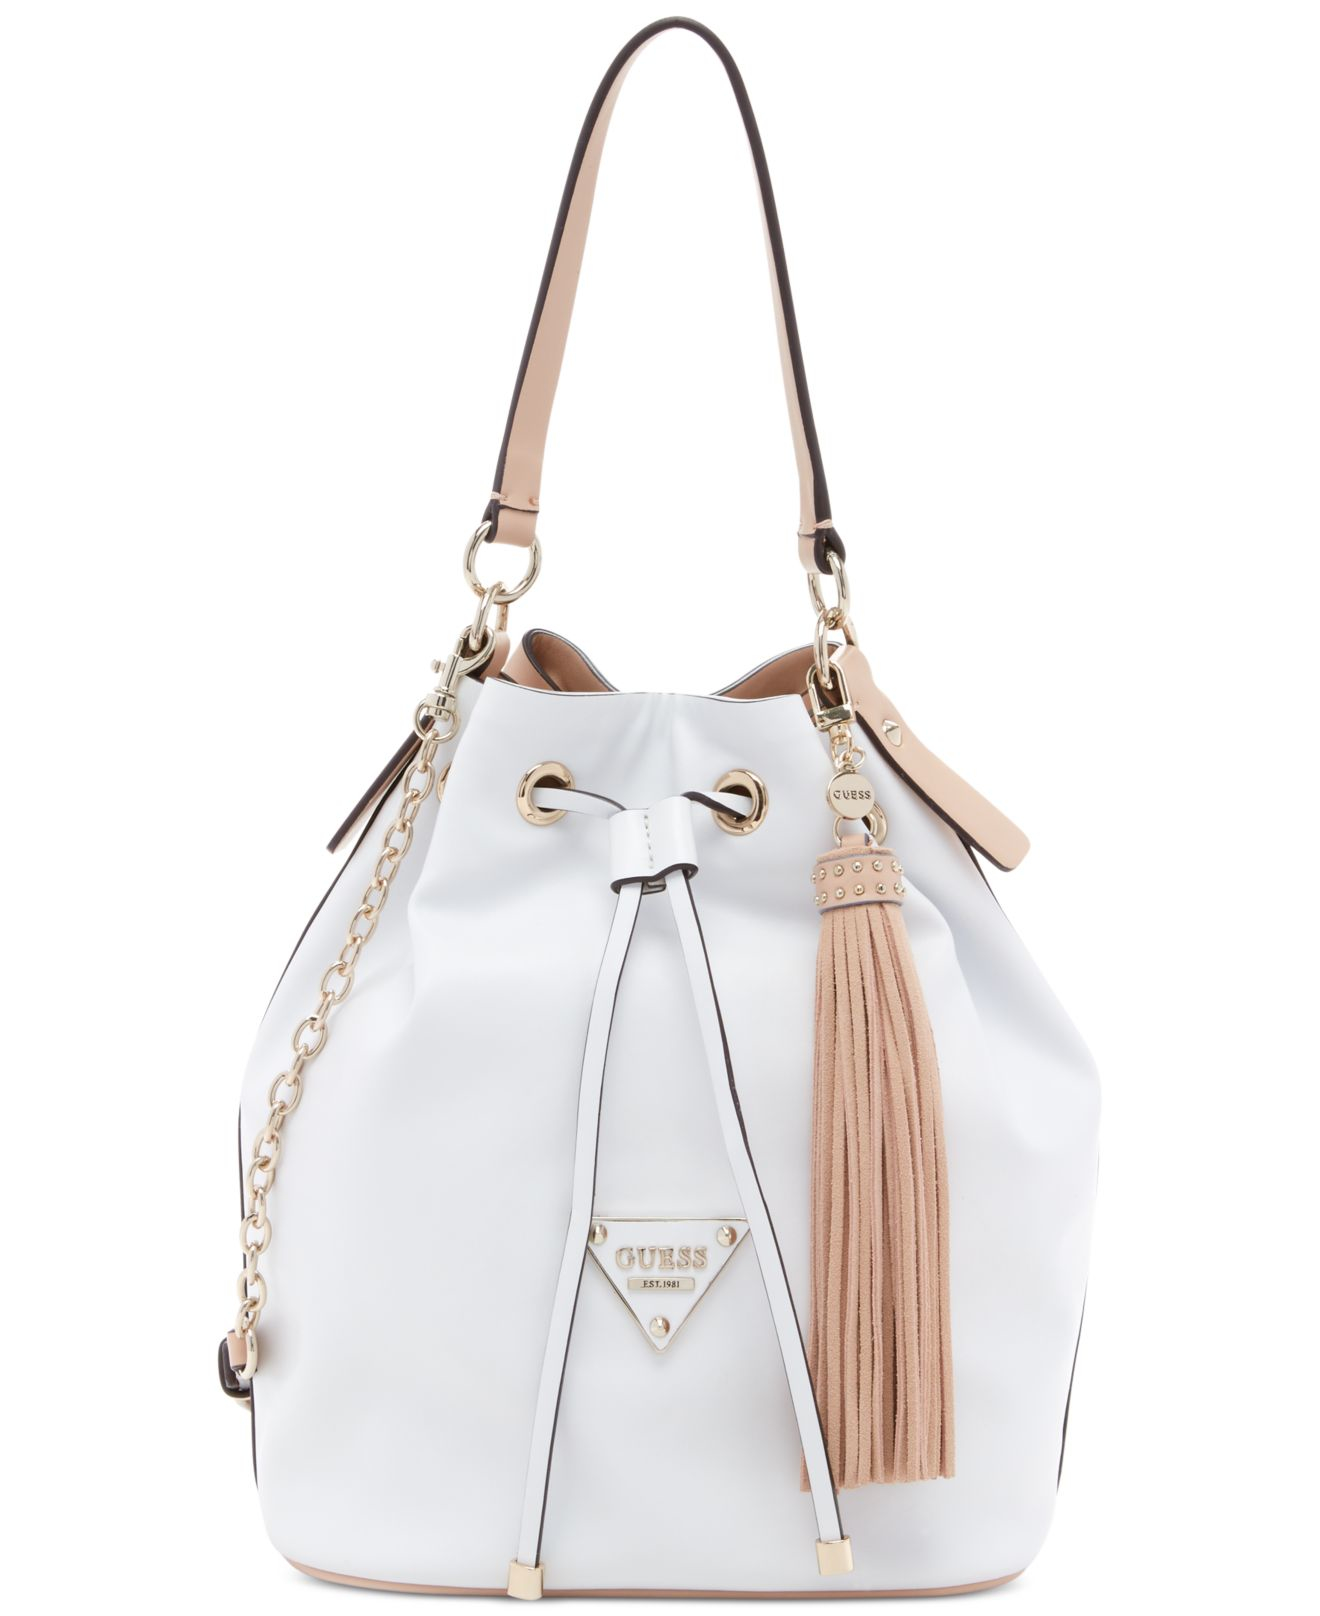 Guess Thompson Drawstring Bucket Bag in White - Lyst